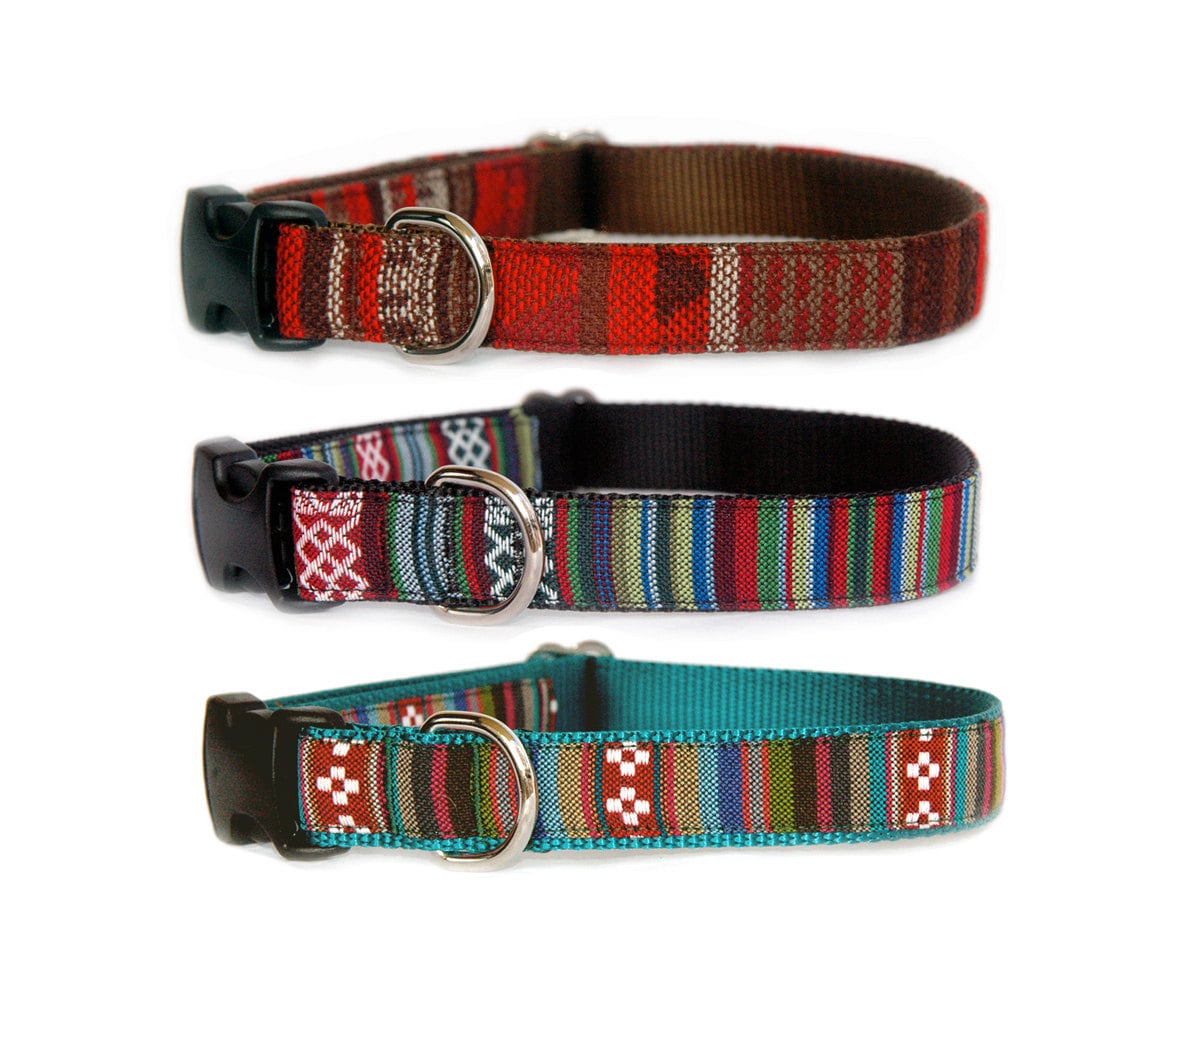 Southwestern tribal stripe dog collar Nabajo, Mexican, Native American,inspired pet collar. Matching dog leash dog harness are available